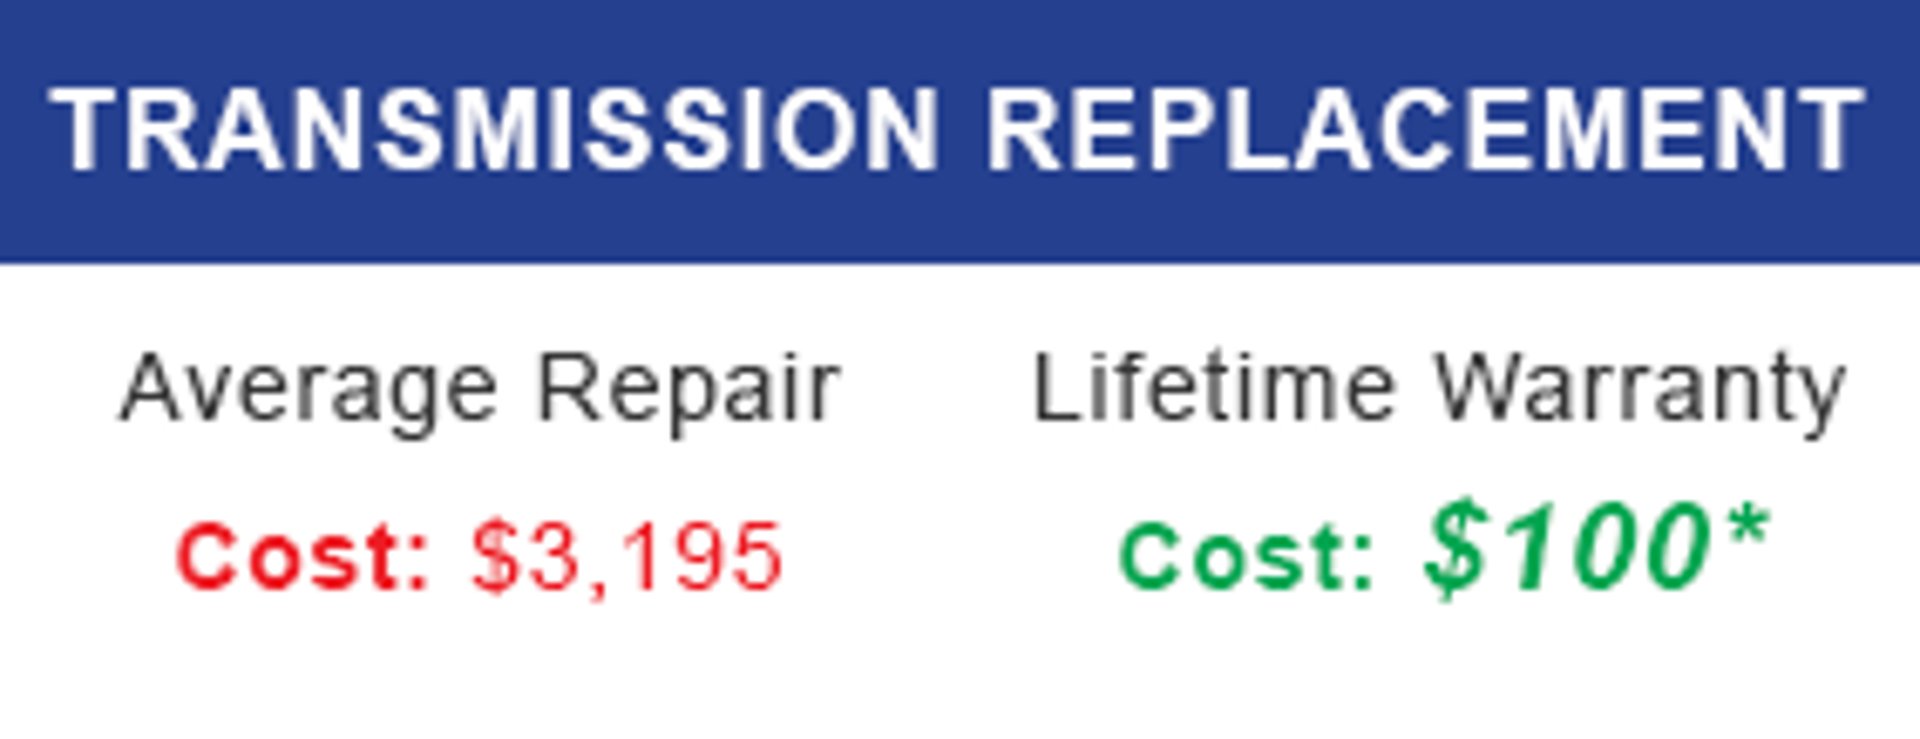 Transmission Replacement